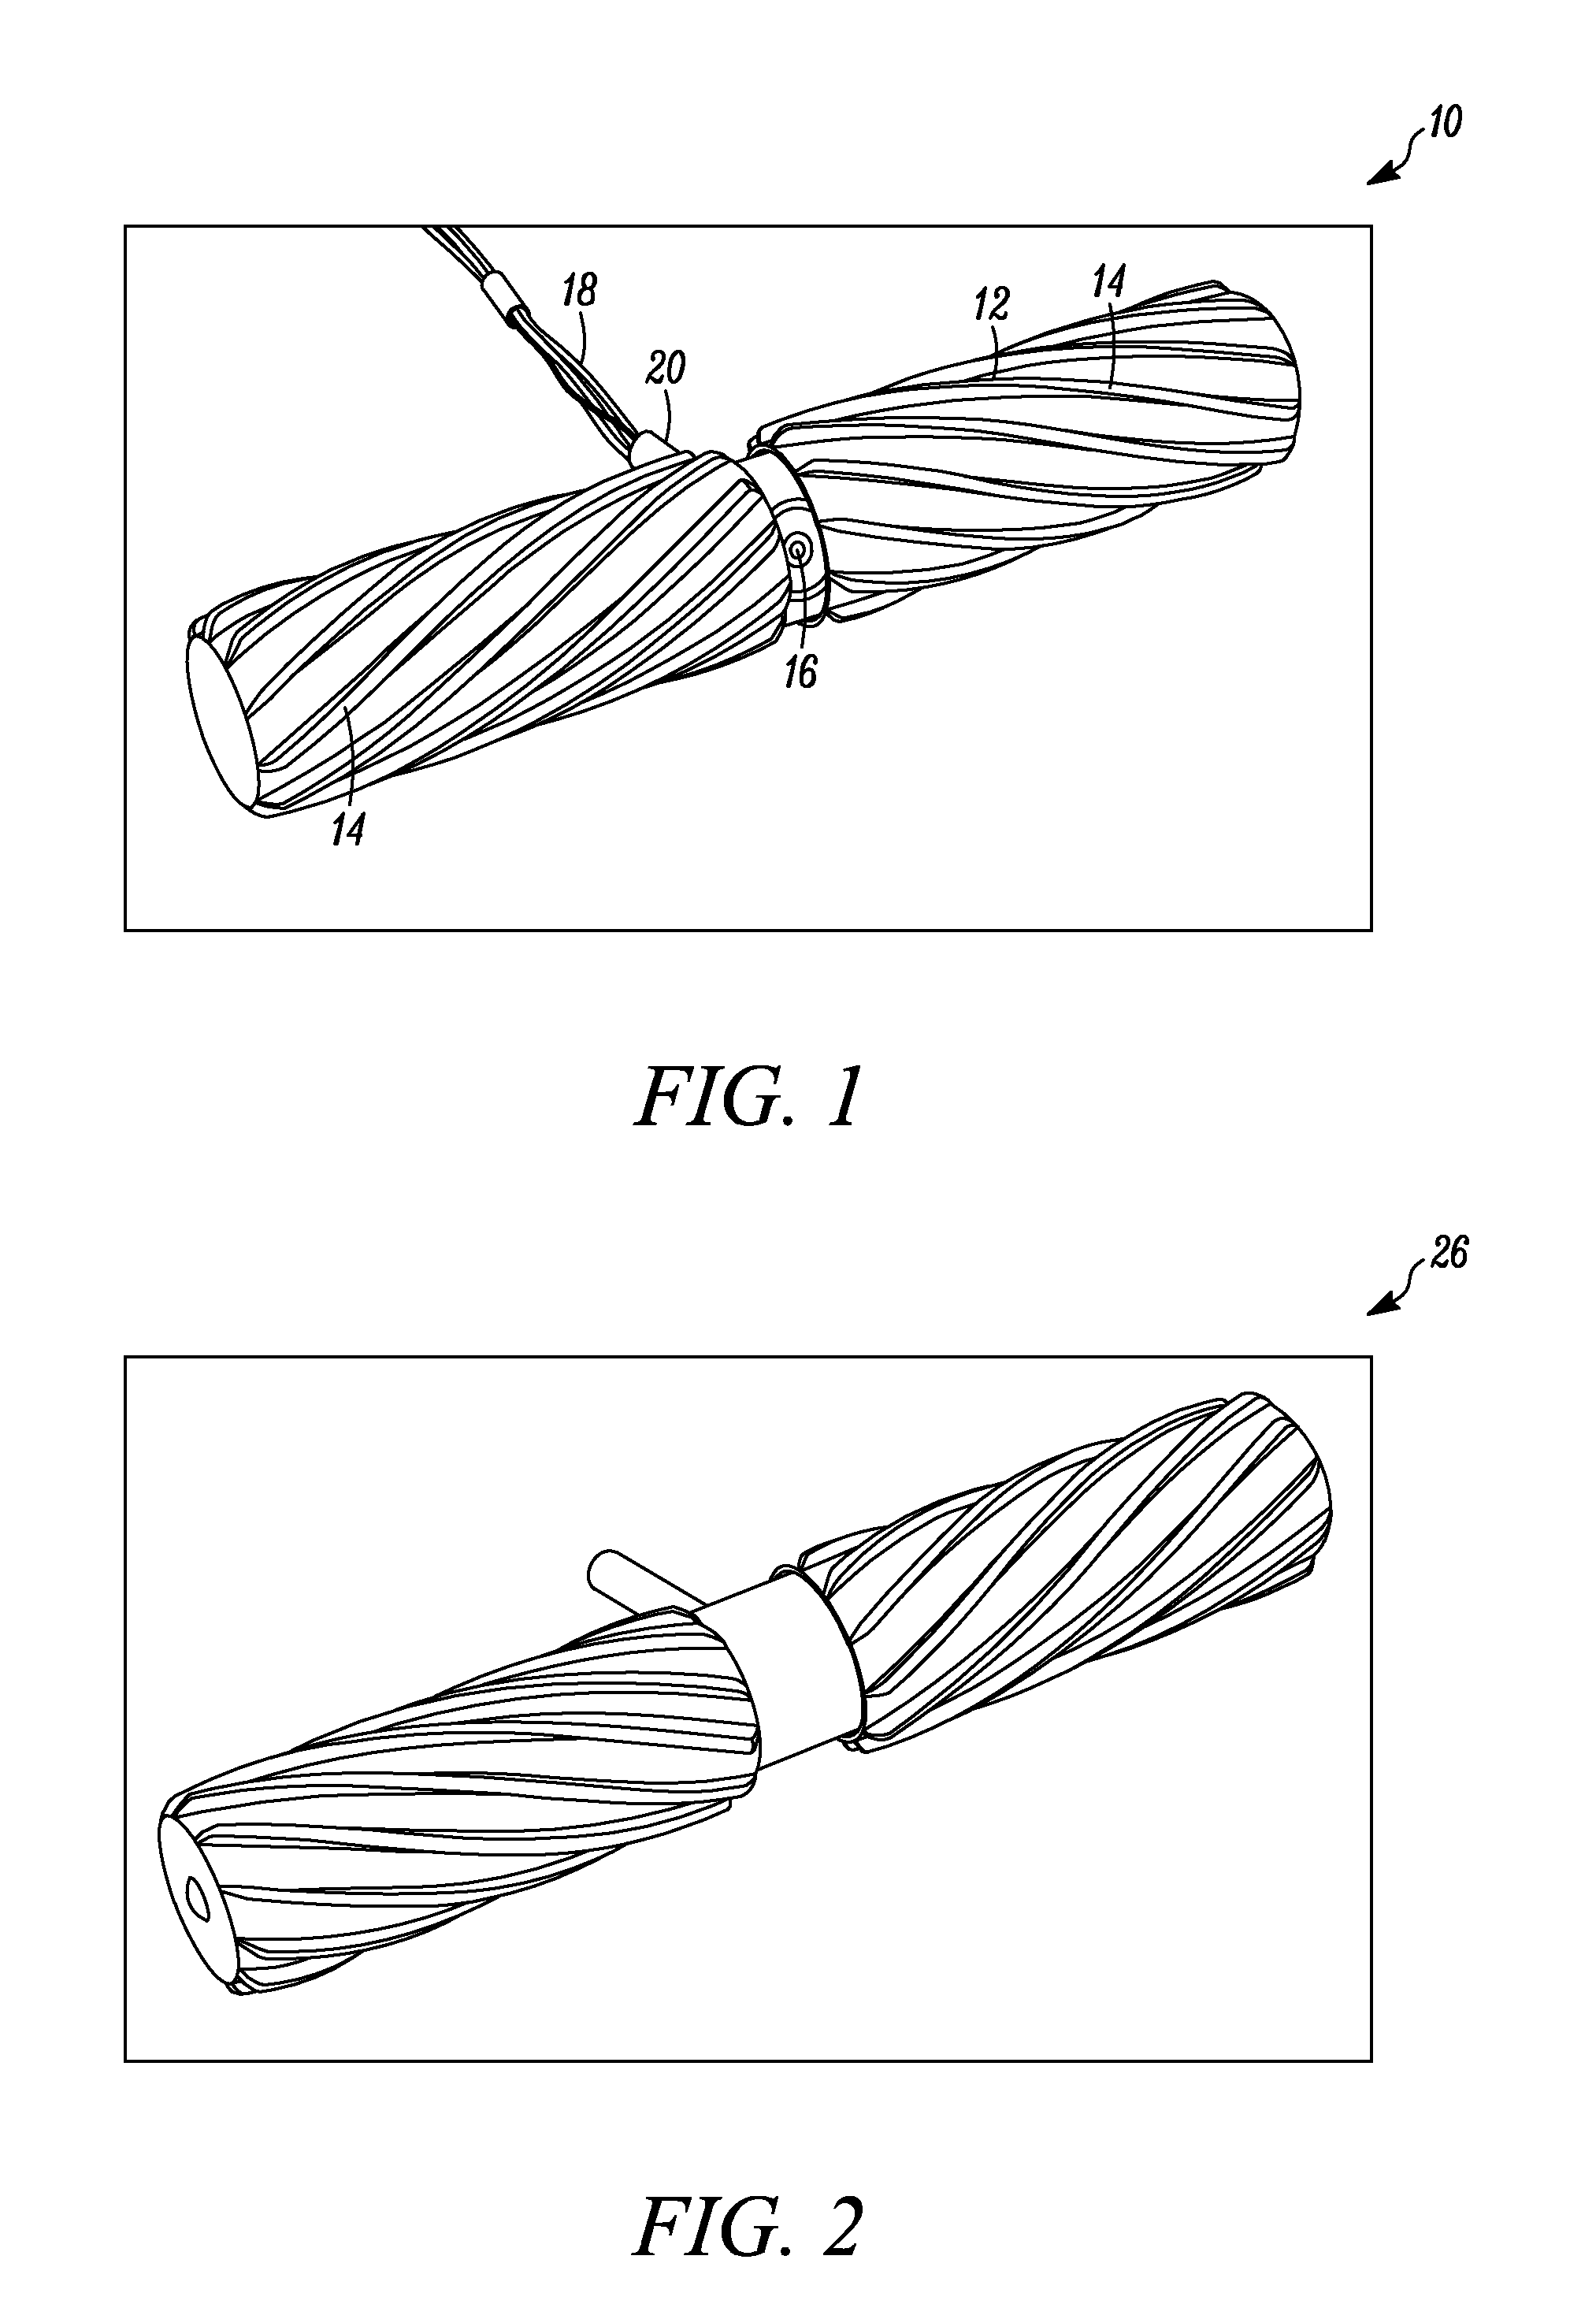 Magnetically coupleable robotic surgical devices and related methods